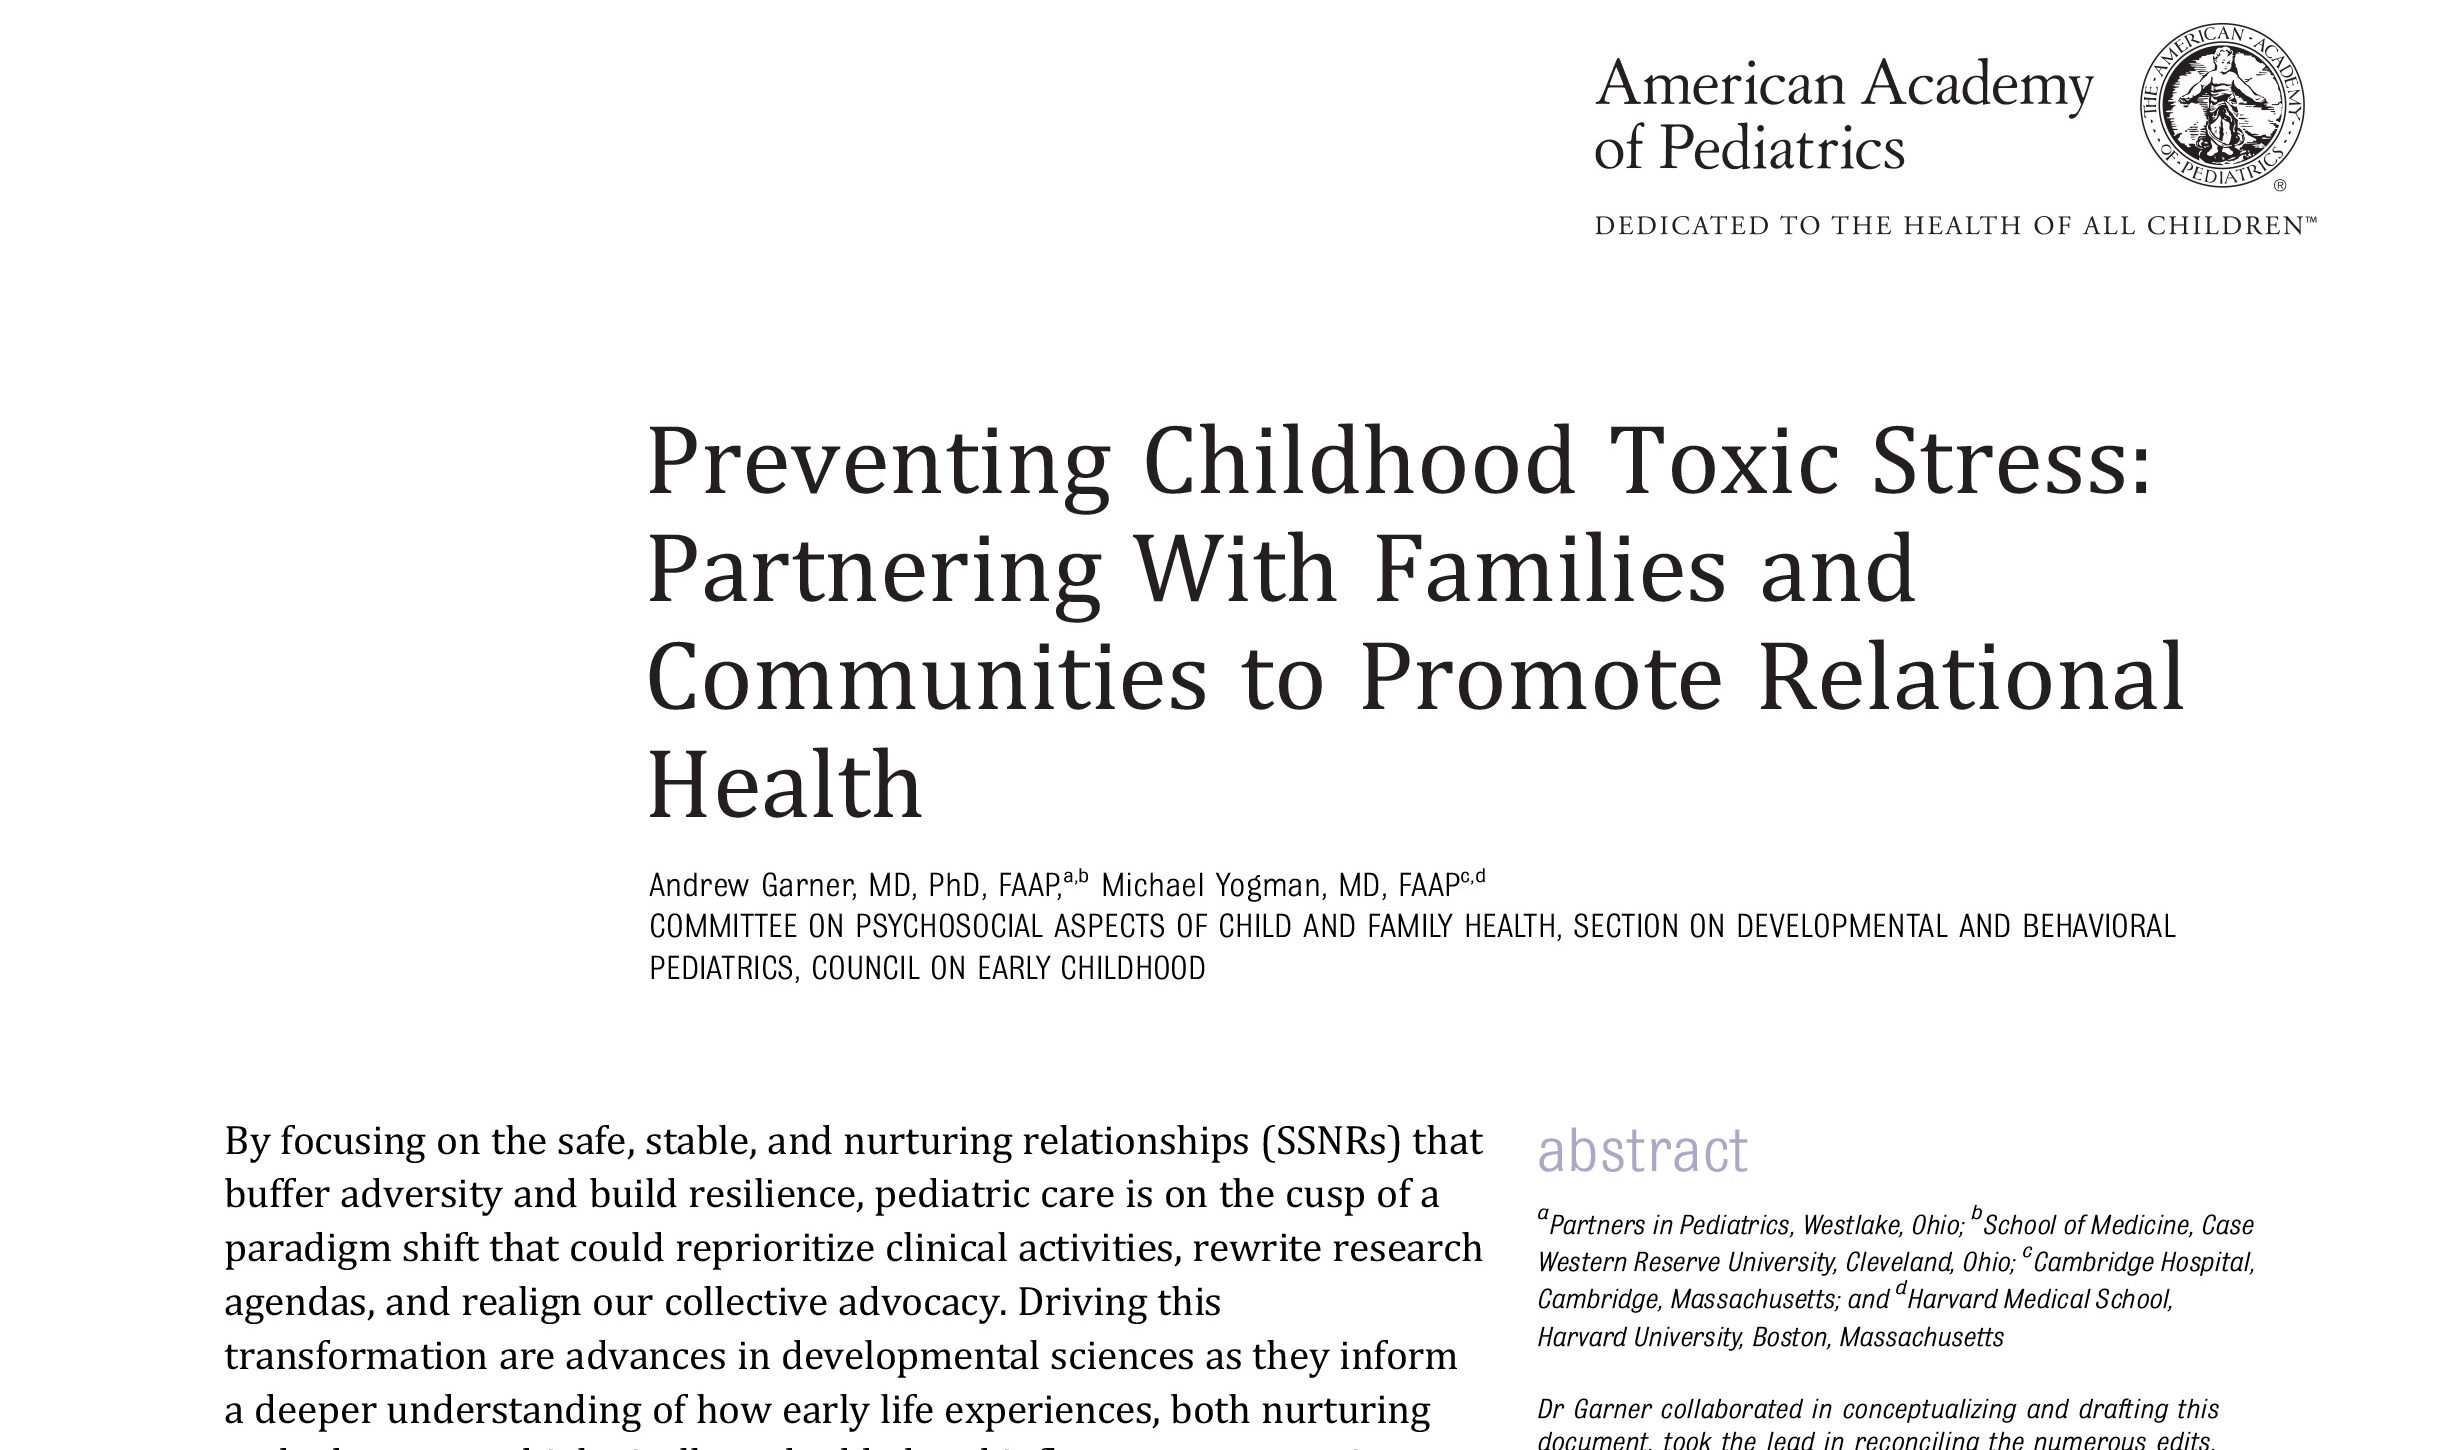 Preventing Childhood Toxic Stress Partnering With Families And Communities To Promote Relational Health 1 Scaled Aspect Ratio 820 488